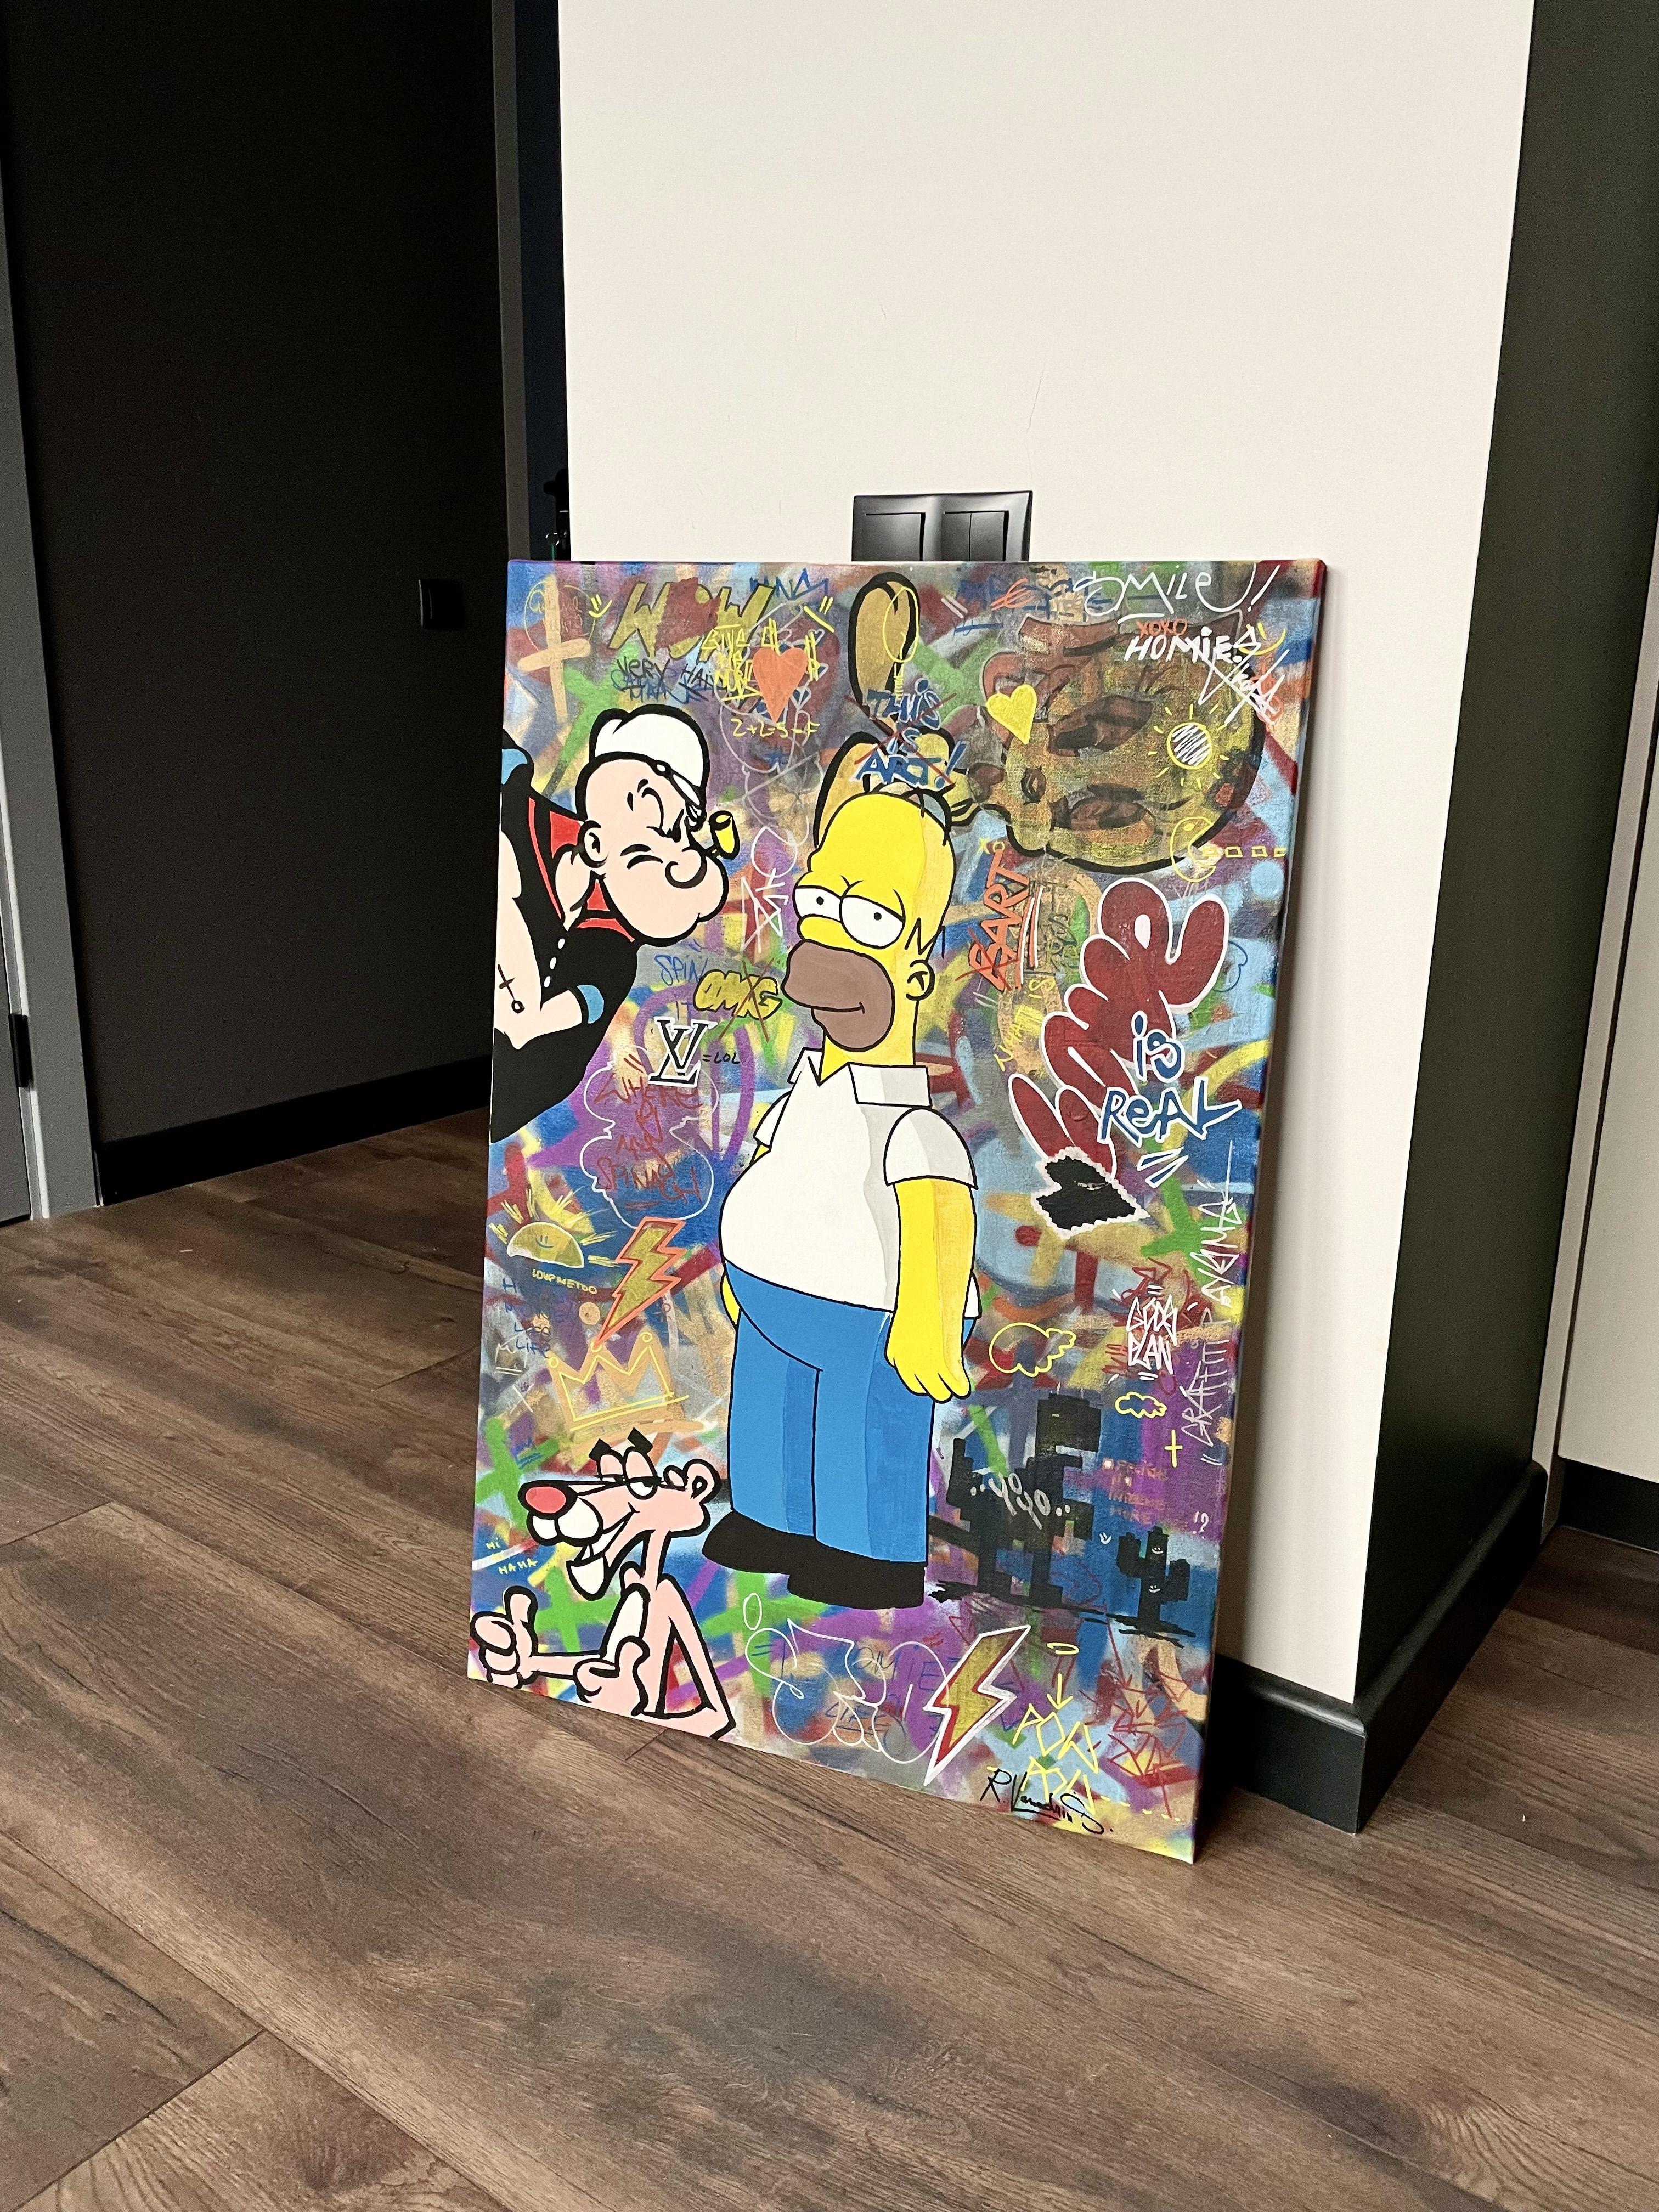 Acrylics and spray paint on stretched canvas.  Tripping Homer is an artwork inspired by the artist's all-time favorite tv show.  The painting represents Homer Simpson's fantasy trip, where he meets other iconic cartoon stars. :: Painting :: Modern